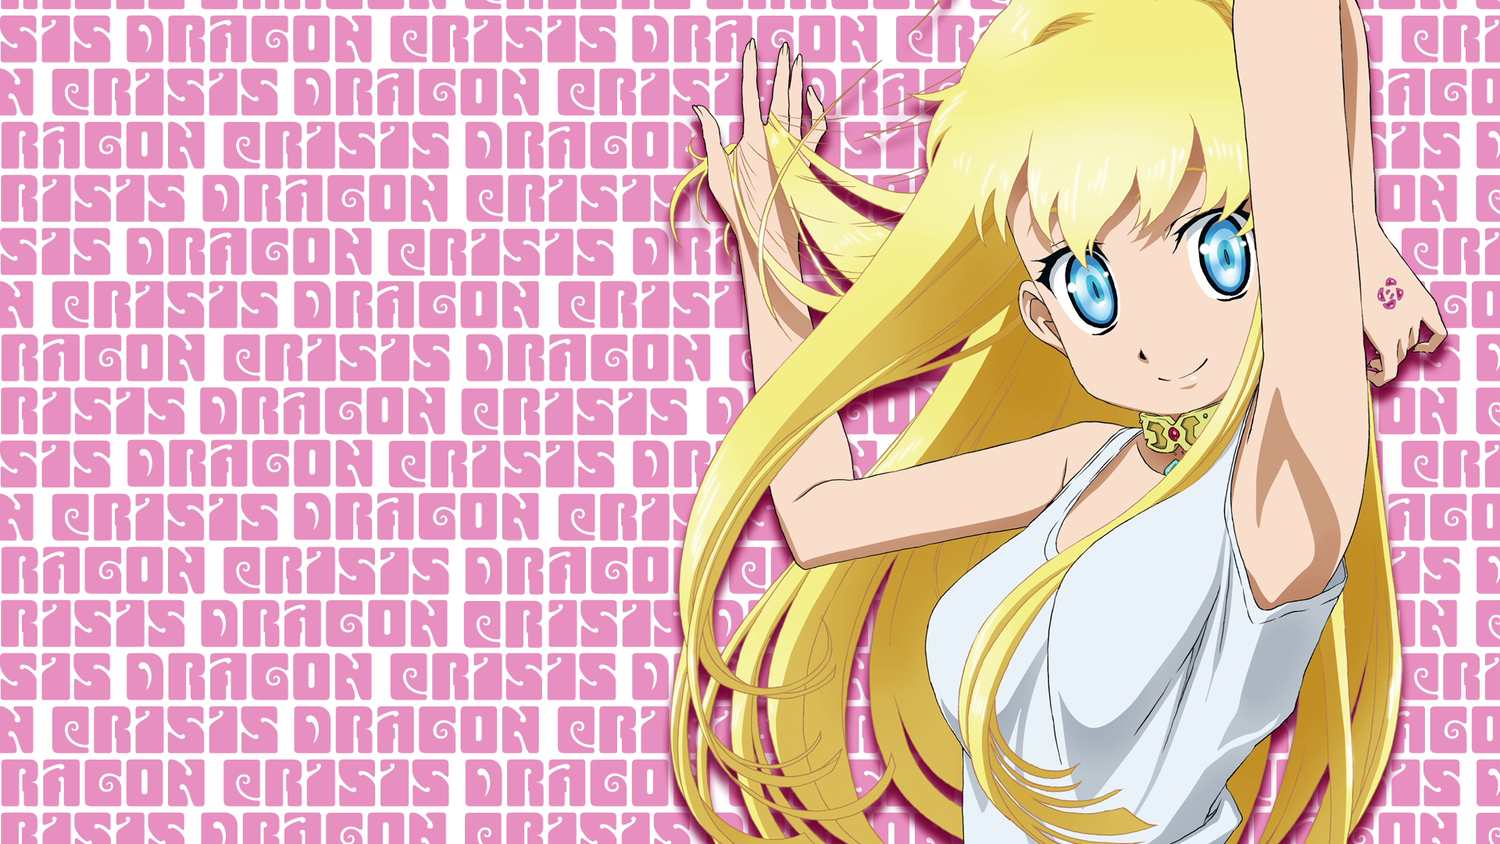 Dragon Crisis! Wallpaper and Background Imagex844